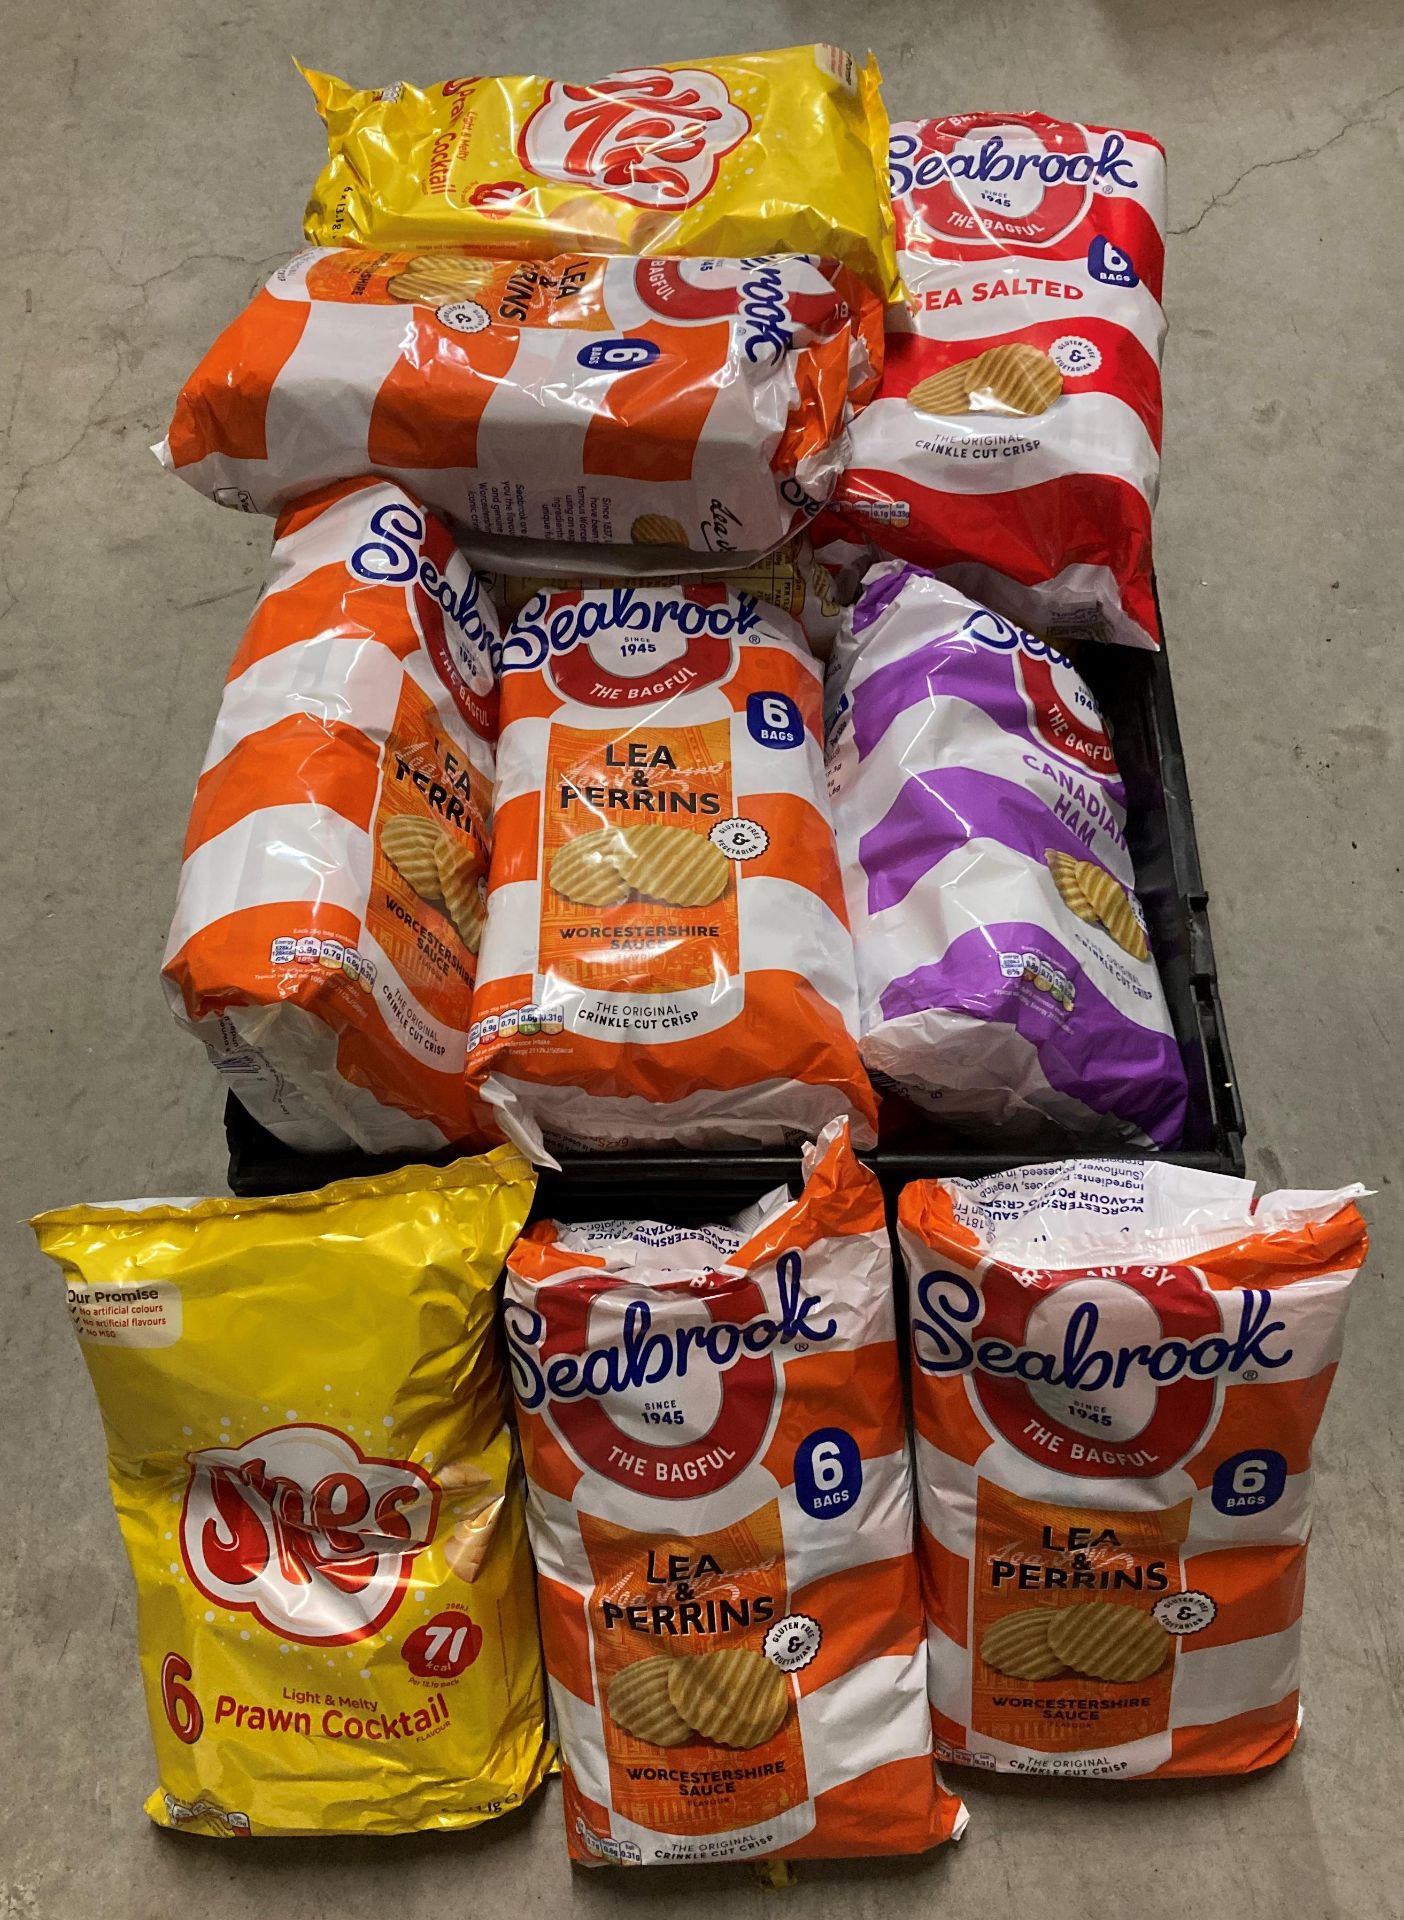 Contents to tray - 18 x 6 packs of Seabrook and Skips crisps in assorted flavours (saleroom